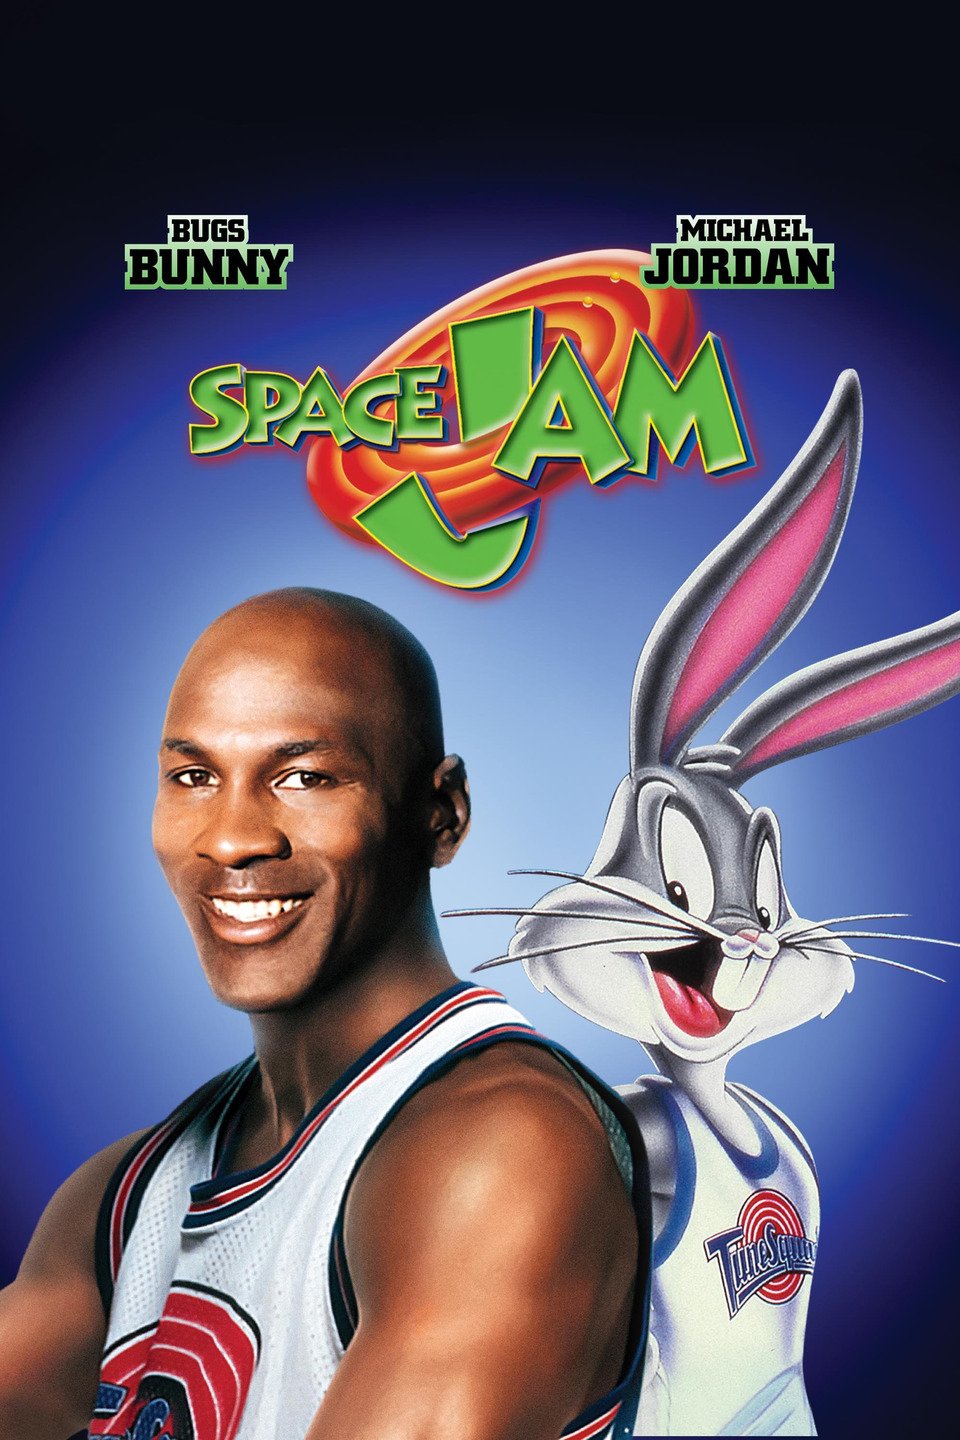 A view of the Space Jam flick cover